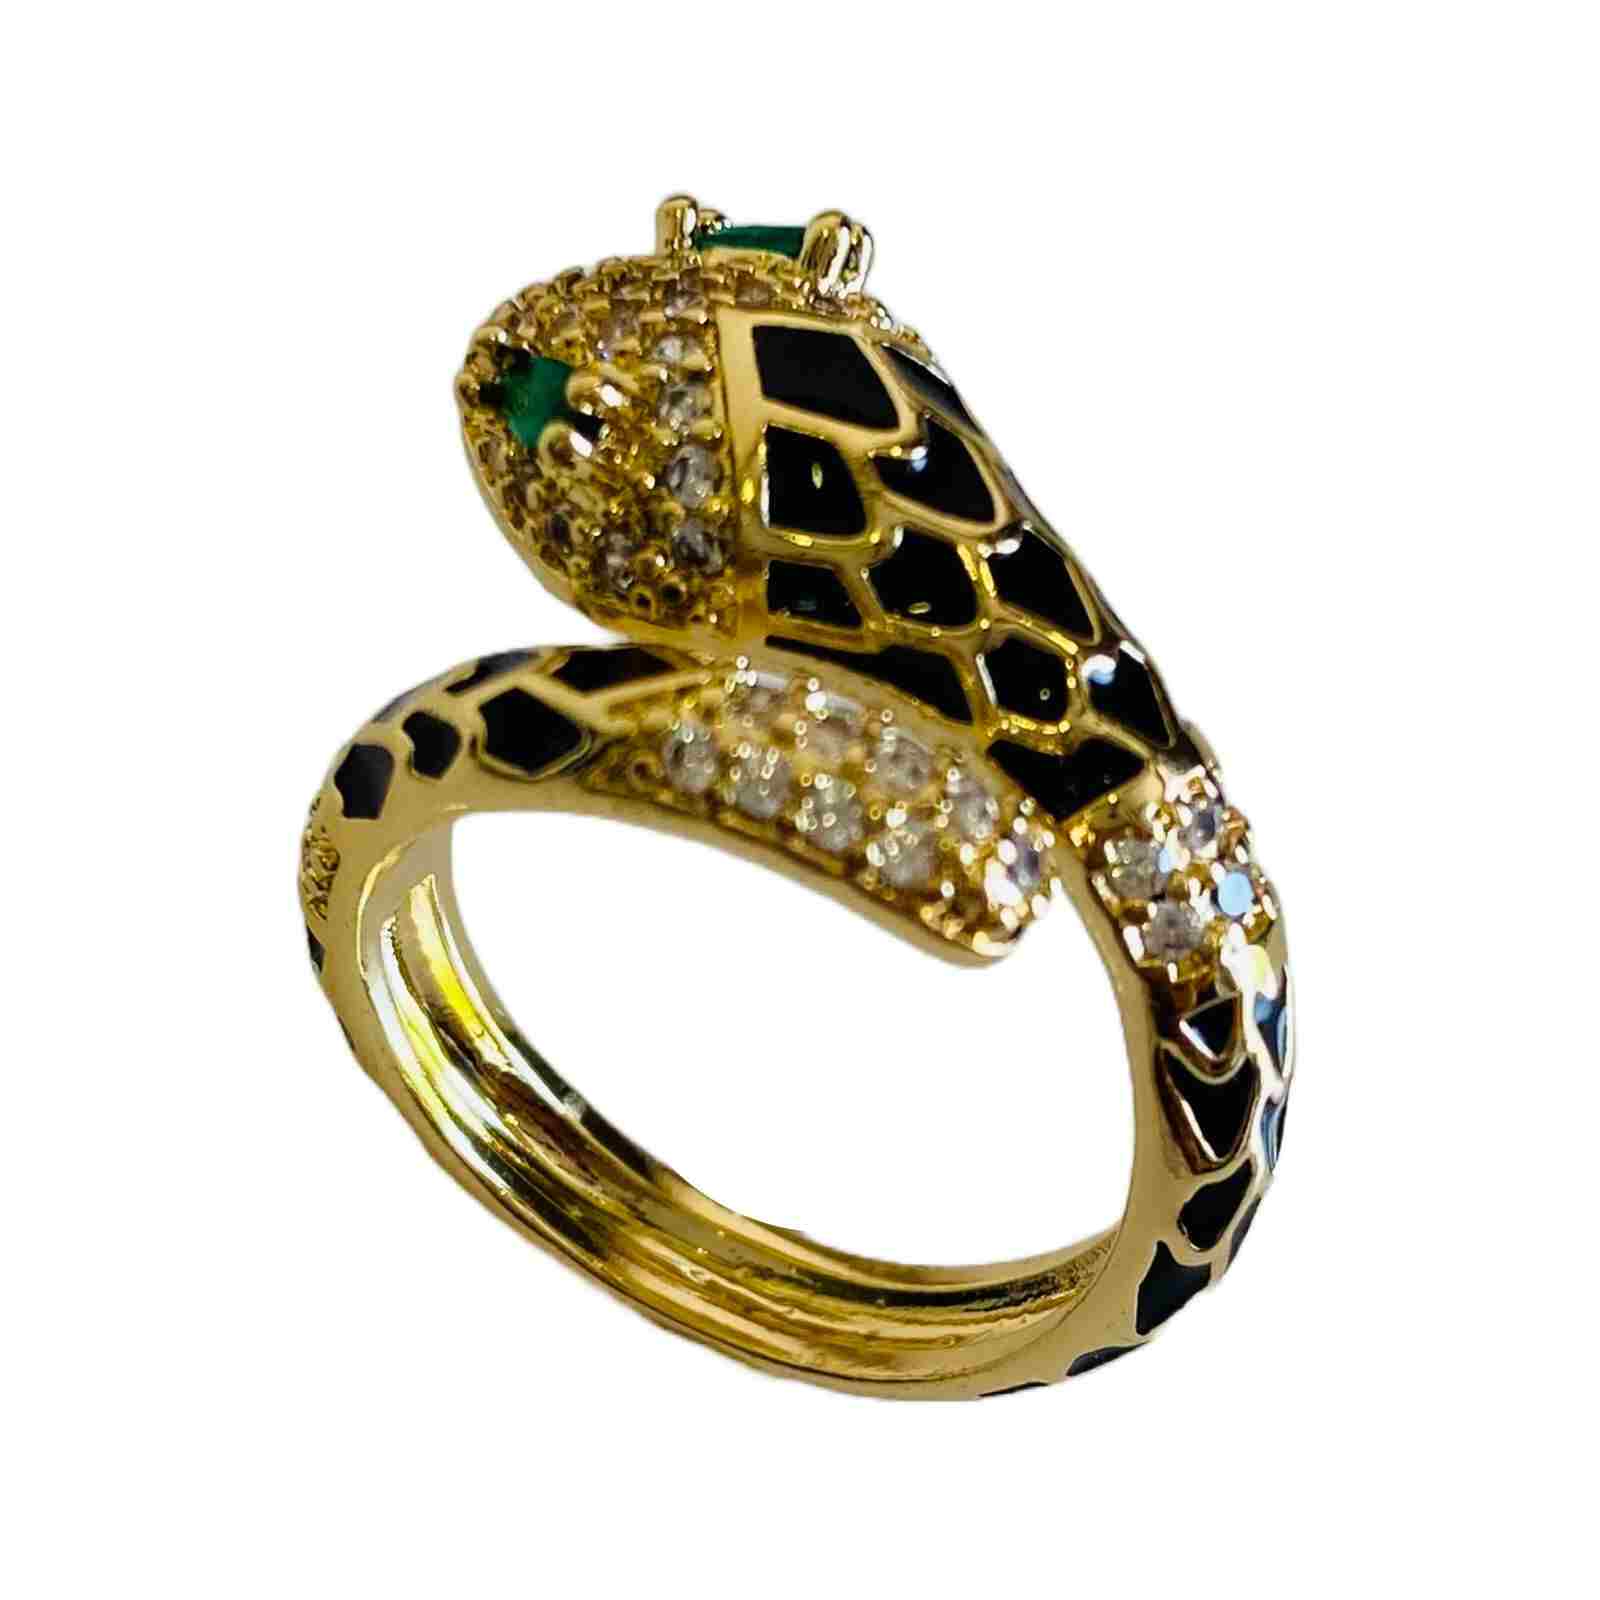 Rhinestone Snake Ring by Kenneth Jay Lane at ORCHARD MILE